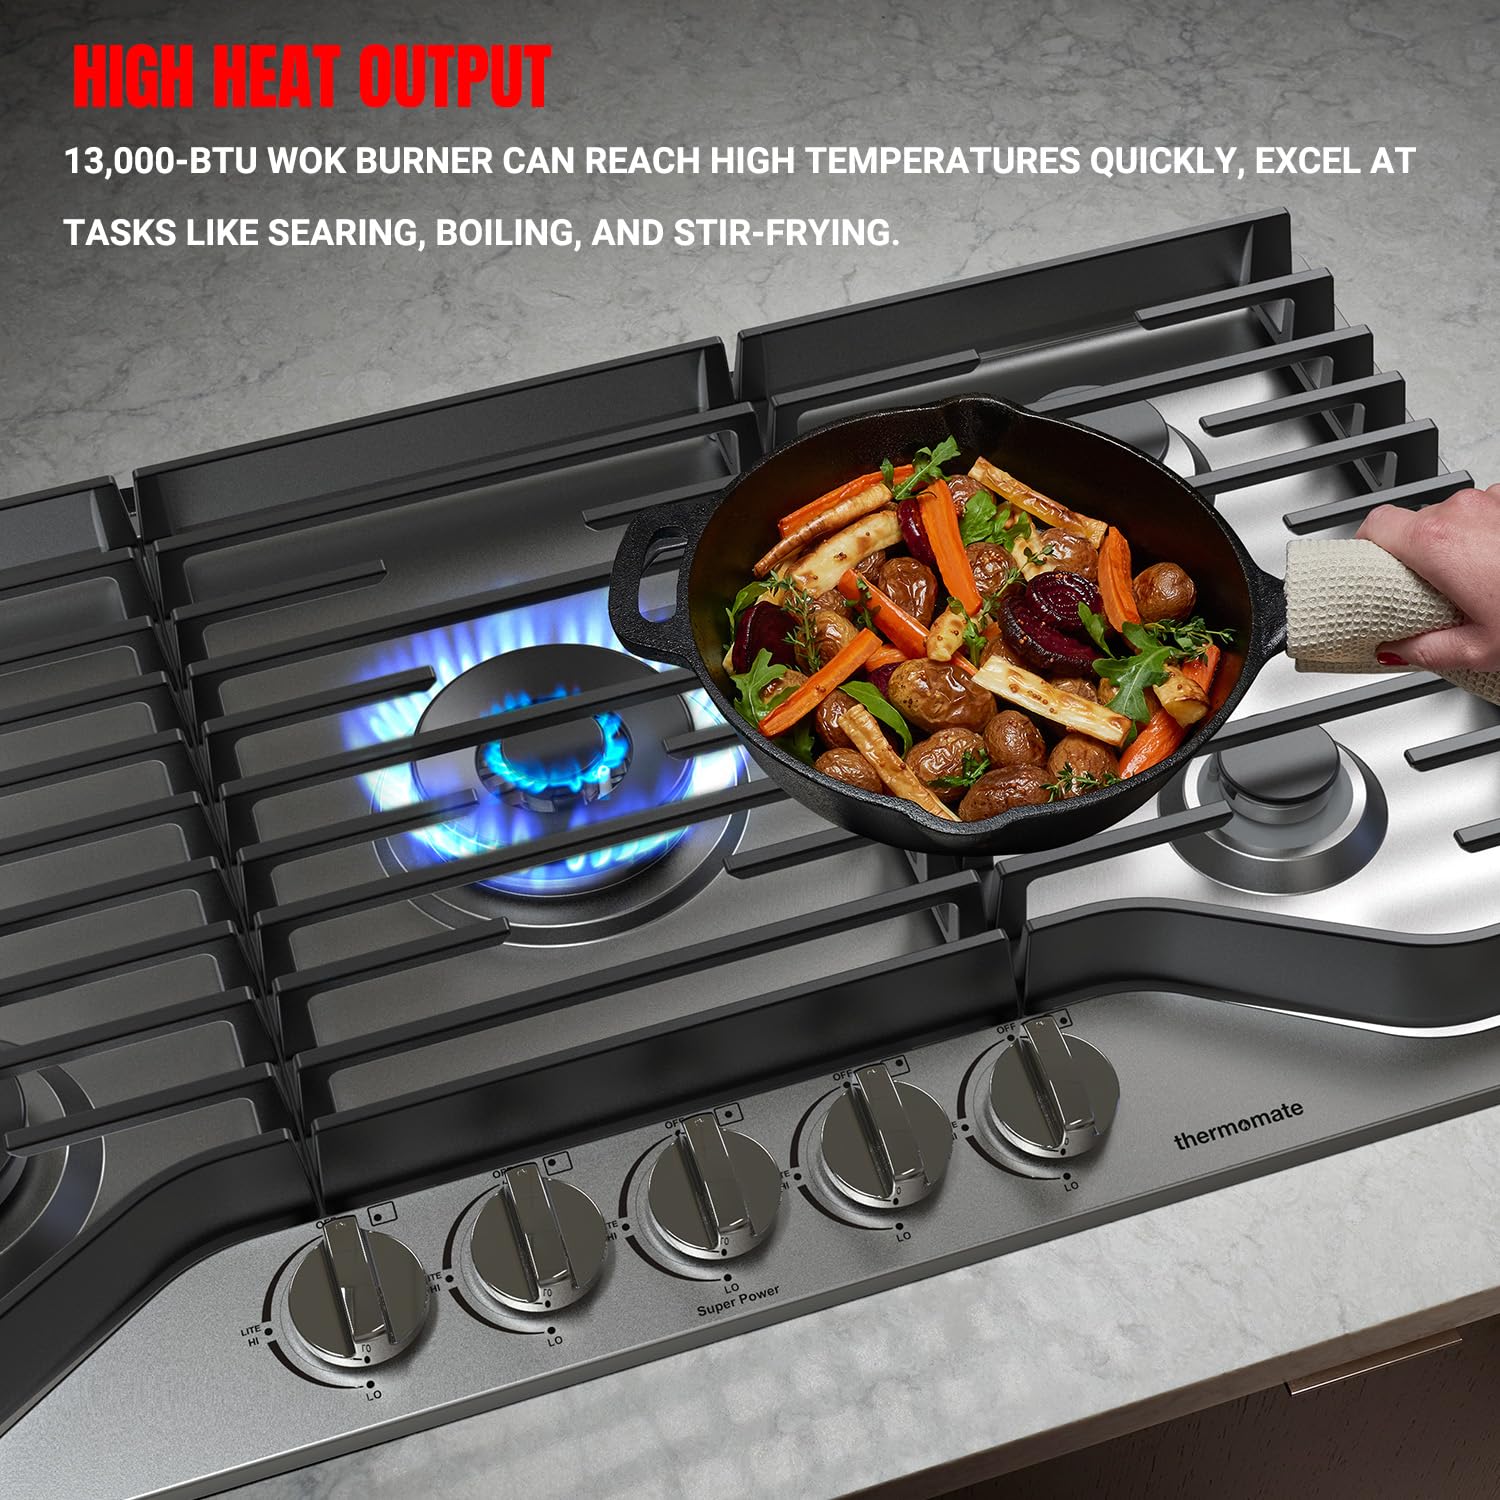 13,000-BTU WOK BURNER CAN REACH HIGH TEMPERATURES QUICKLY, EXCEL ATTASKS LIKE SEARING, BOILING, AND STIR-FRYING.